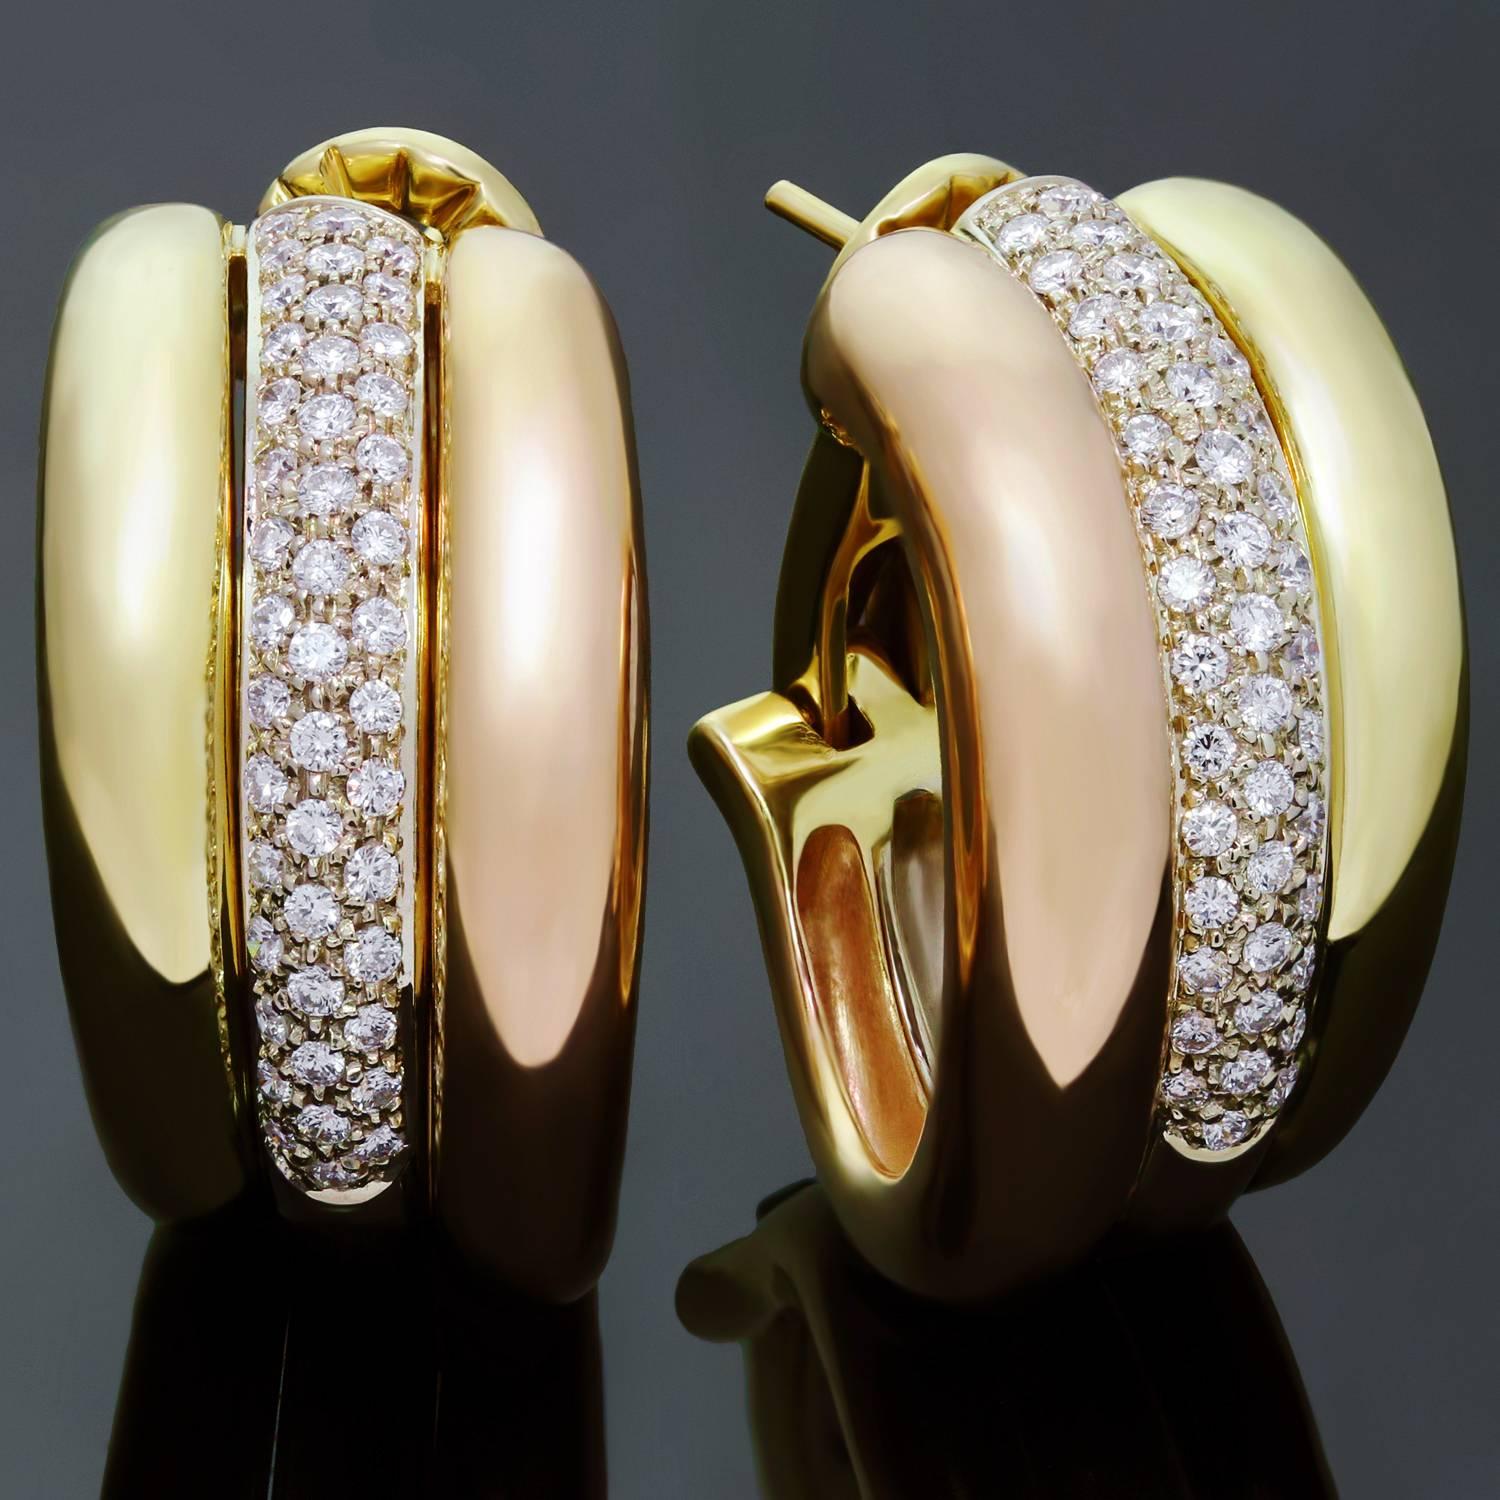 These gorgeous oval wrap earrings from Cartier's Trinity collection are crafted in 18k yellow, white and rose gold and pave-set with brilliant-cut round diamonds of an estimated 1.35 carats in white gold. An iconic design for everyday elegance. Made